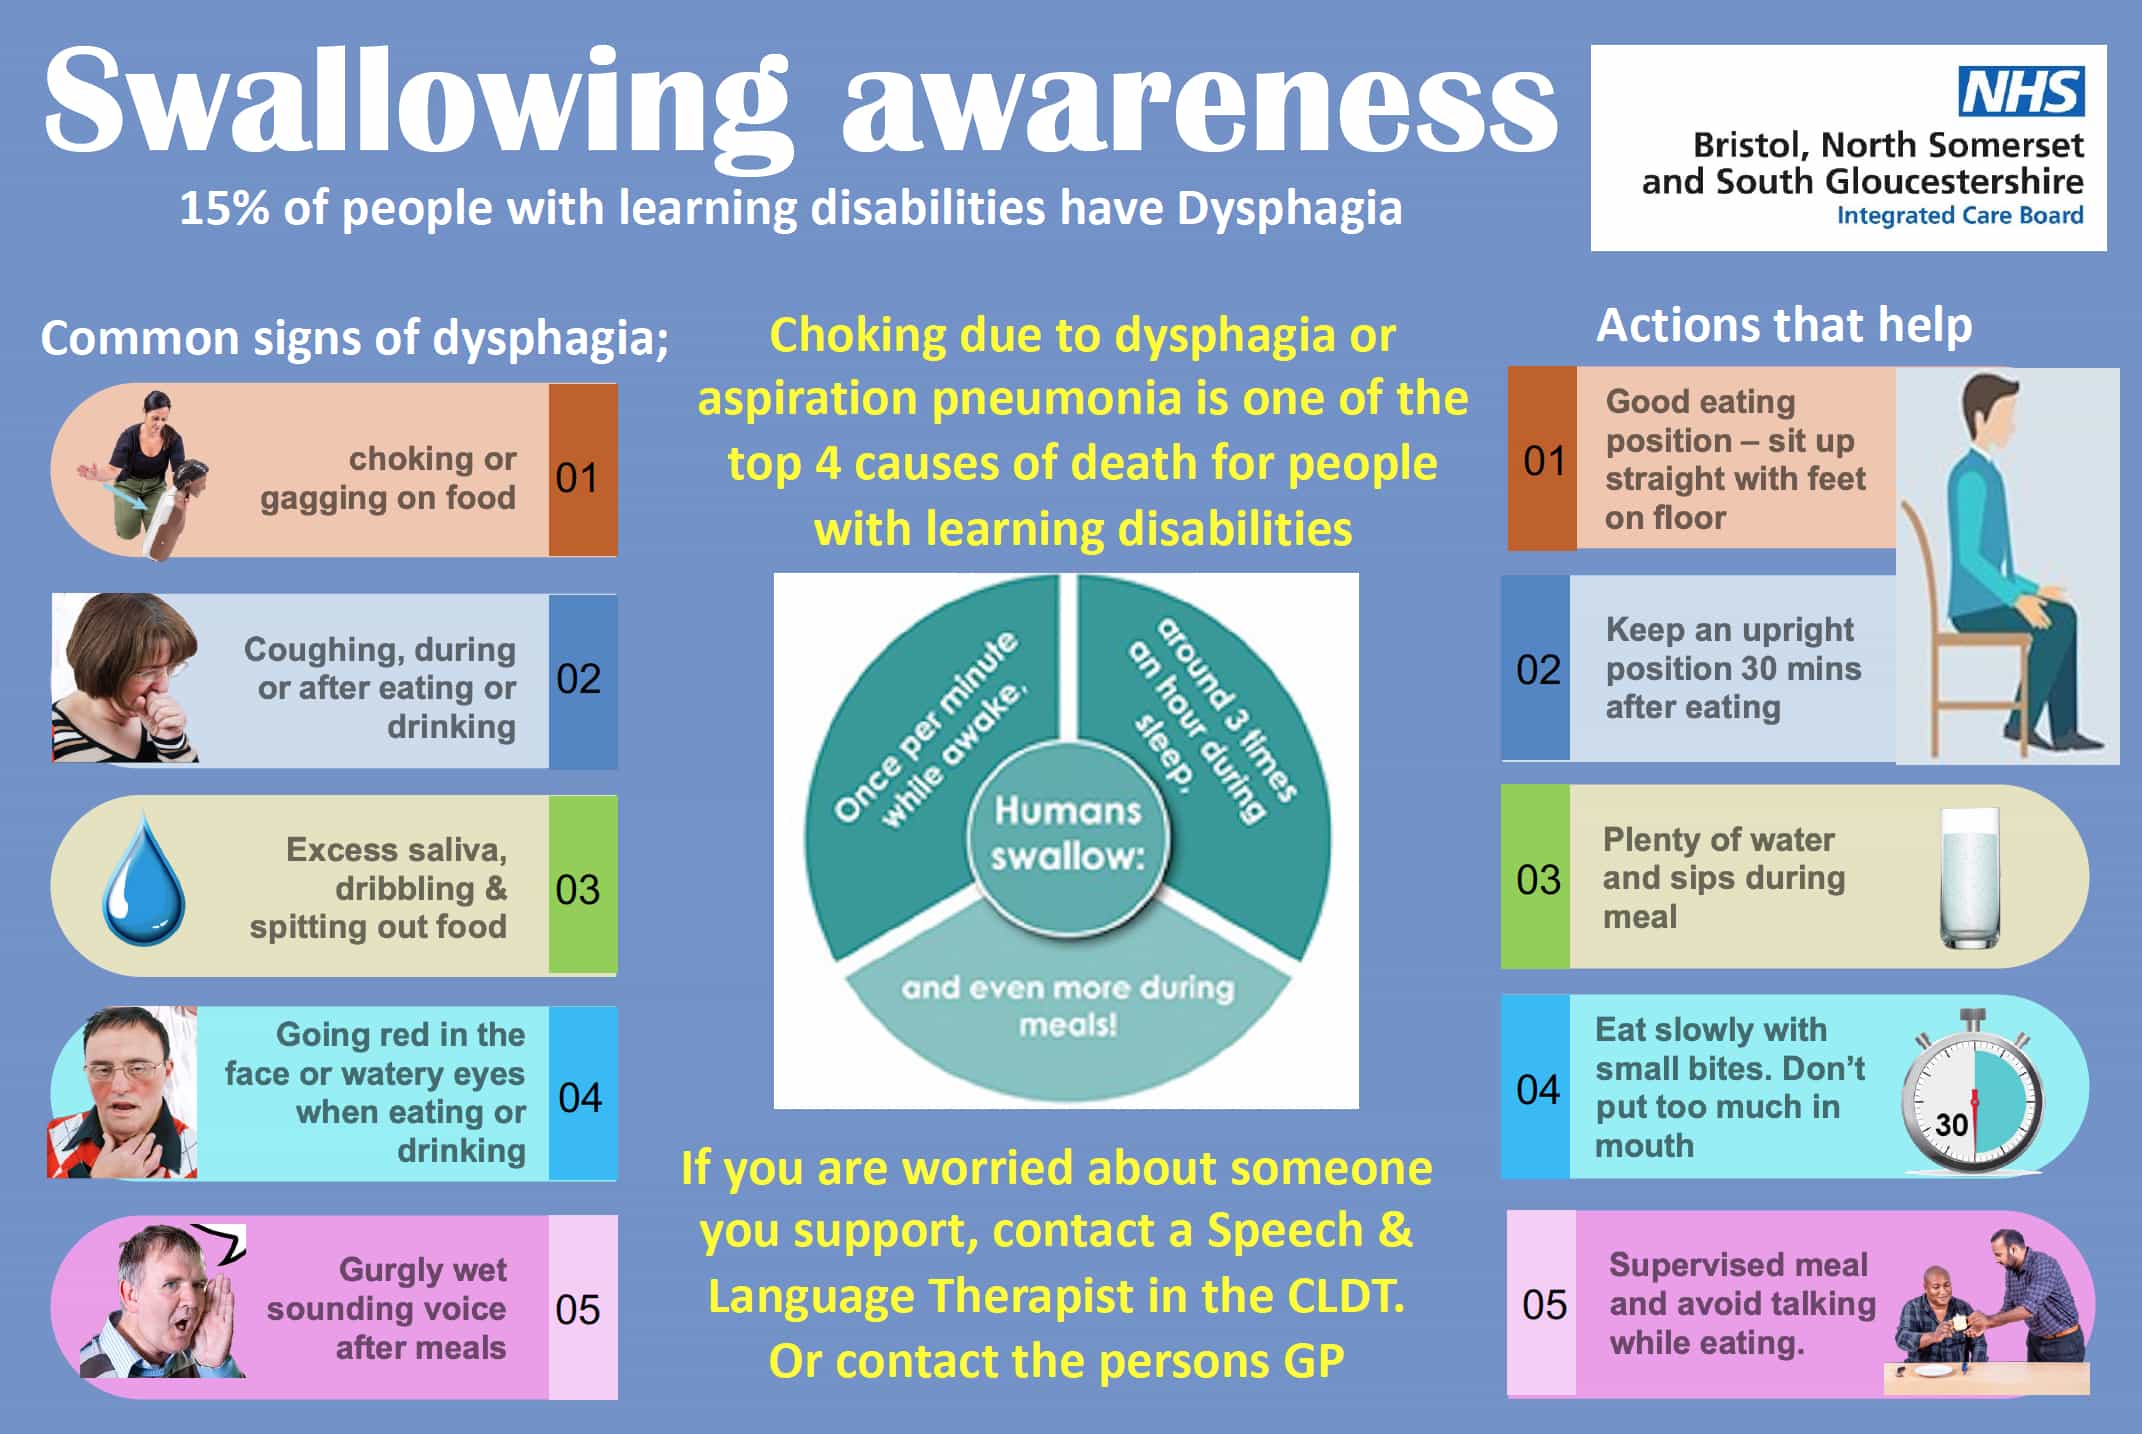 A dysphagia awareness flyer which BNSSG ICB distributed to over 400 care homes